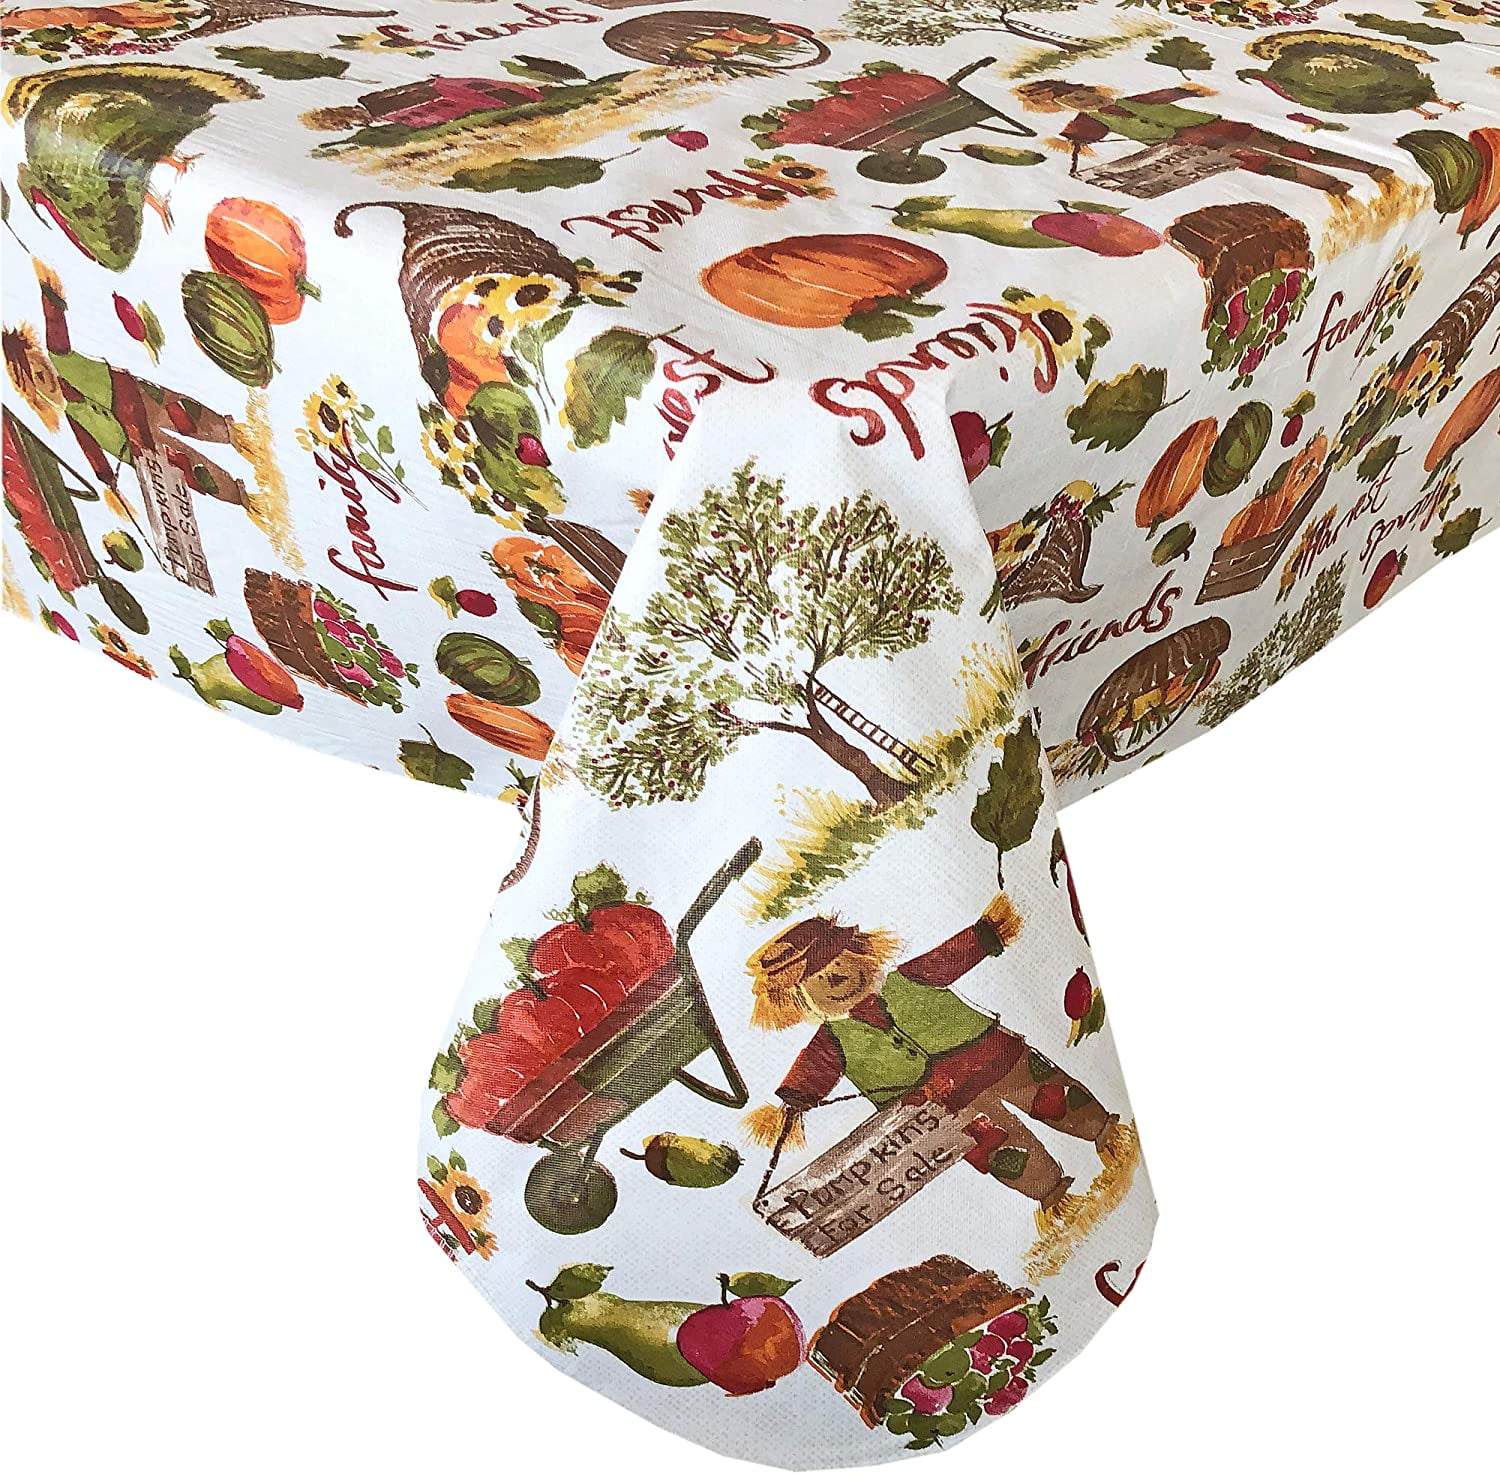 ALAZA Colorful Thanksgiving Autumn Leafs Thanksgiving Tablecloth,Washable Tablecloth,60 x 120 Inch Oblong/Rectangle Tablecloth for Family Dinner,Indoor or Outdoor Parties Etc